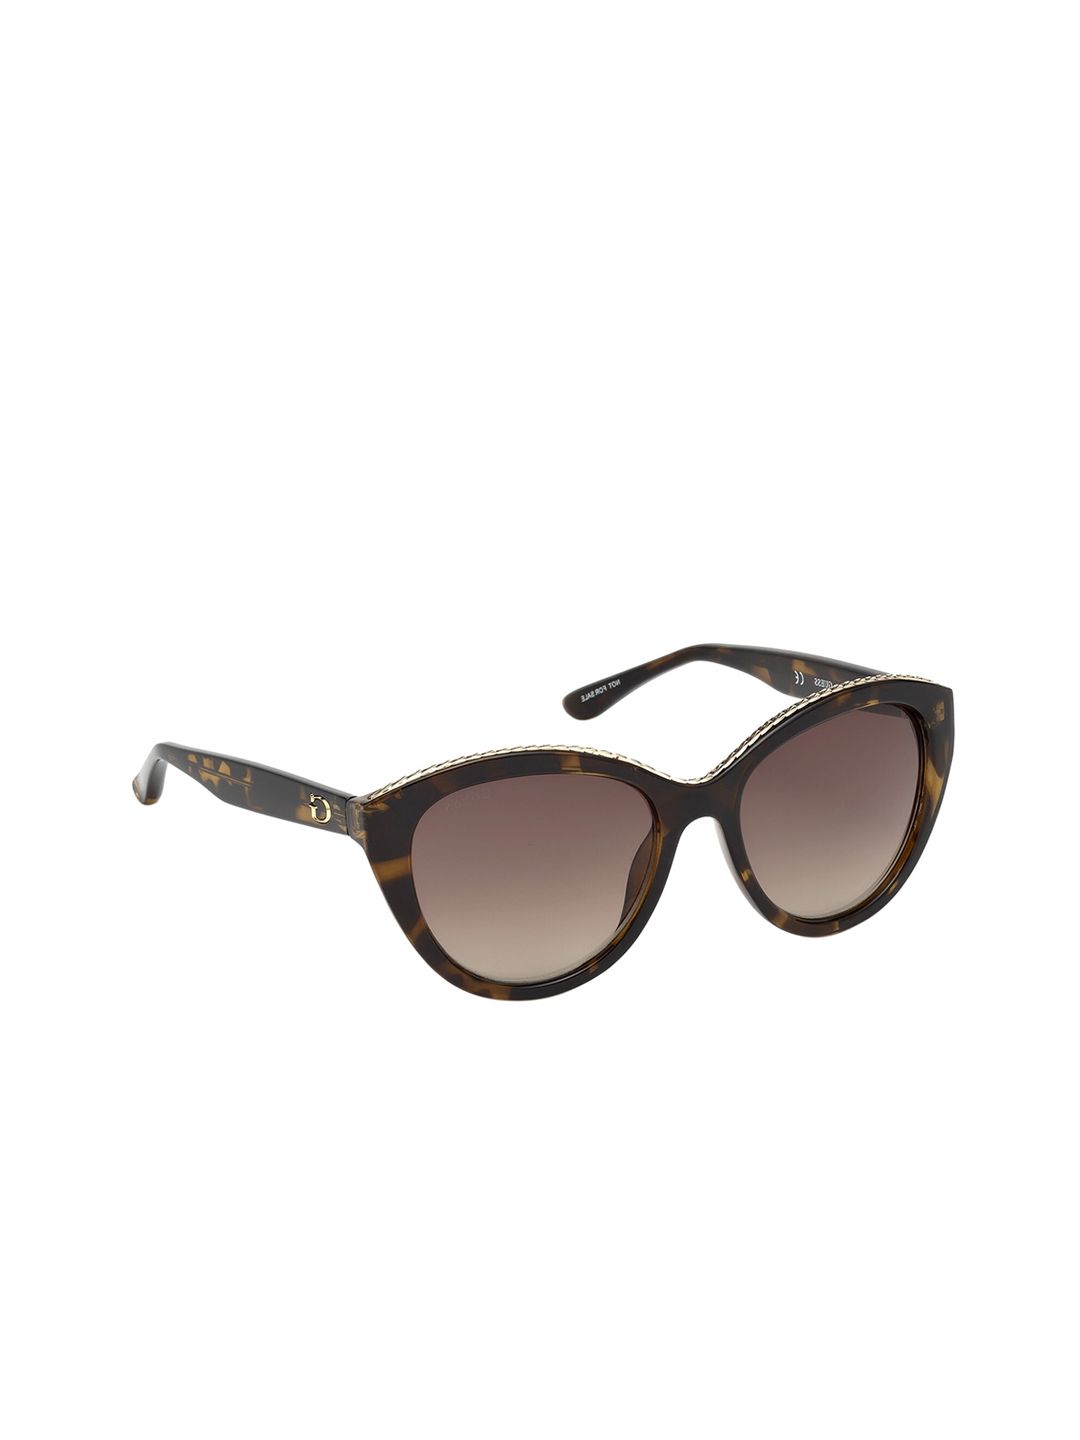 GUESS Women Brown Lens Cateye Sunglasses With UV Protected Lens GU7505 54 52F Price in India